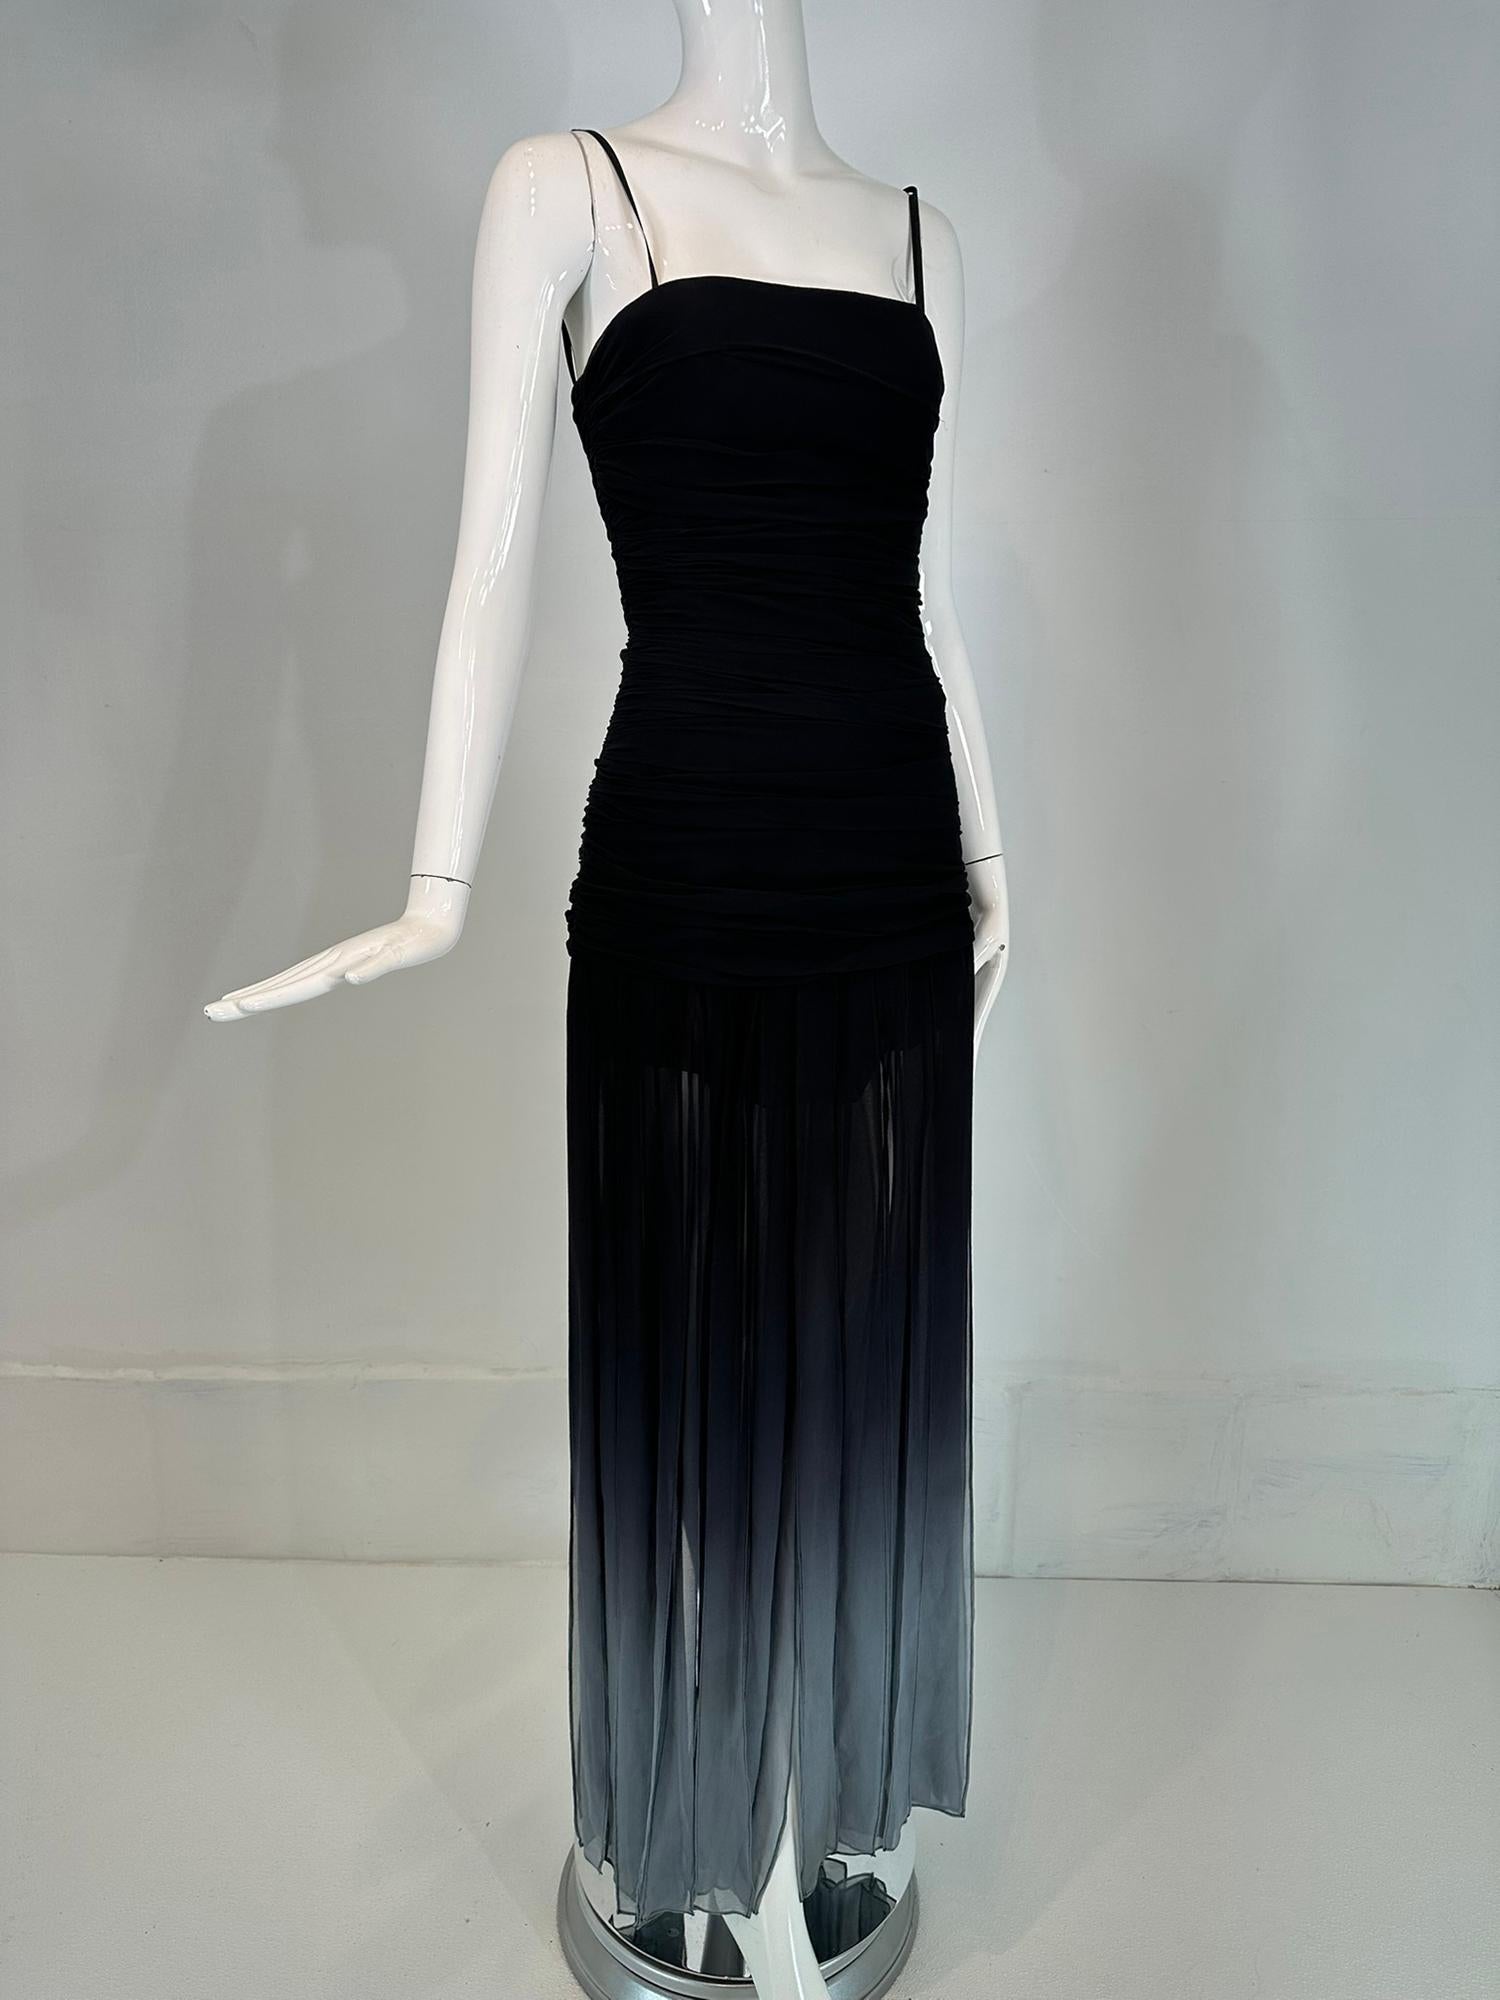 Max Mara BCBG black to grey ombre silk ruched torso car wash skirt evening dress. Gorgeous and sexy spaghetti strap dress of black silk with a fitted torso of ruched ruffles. The skirt is done in long strips of silk in gradient black to grey at the